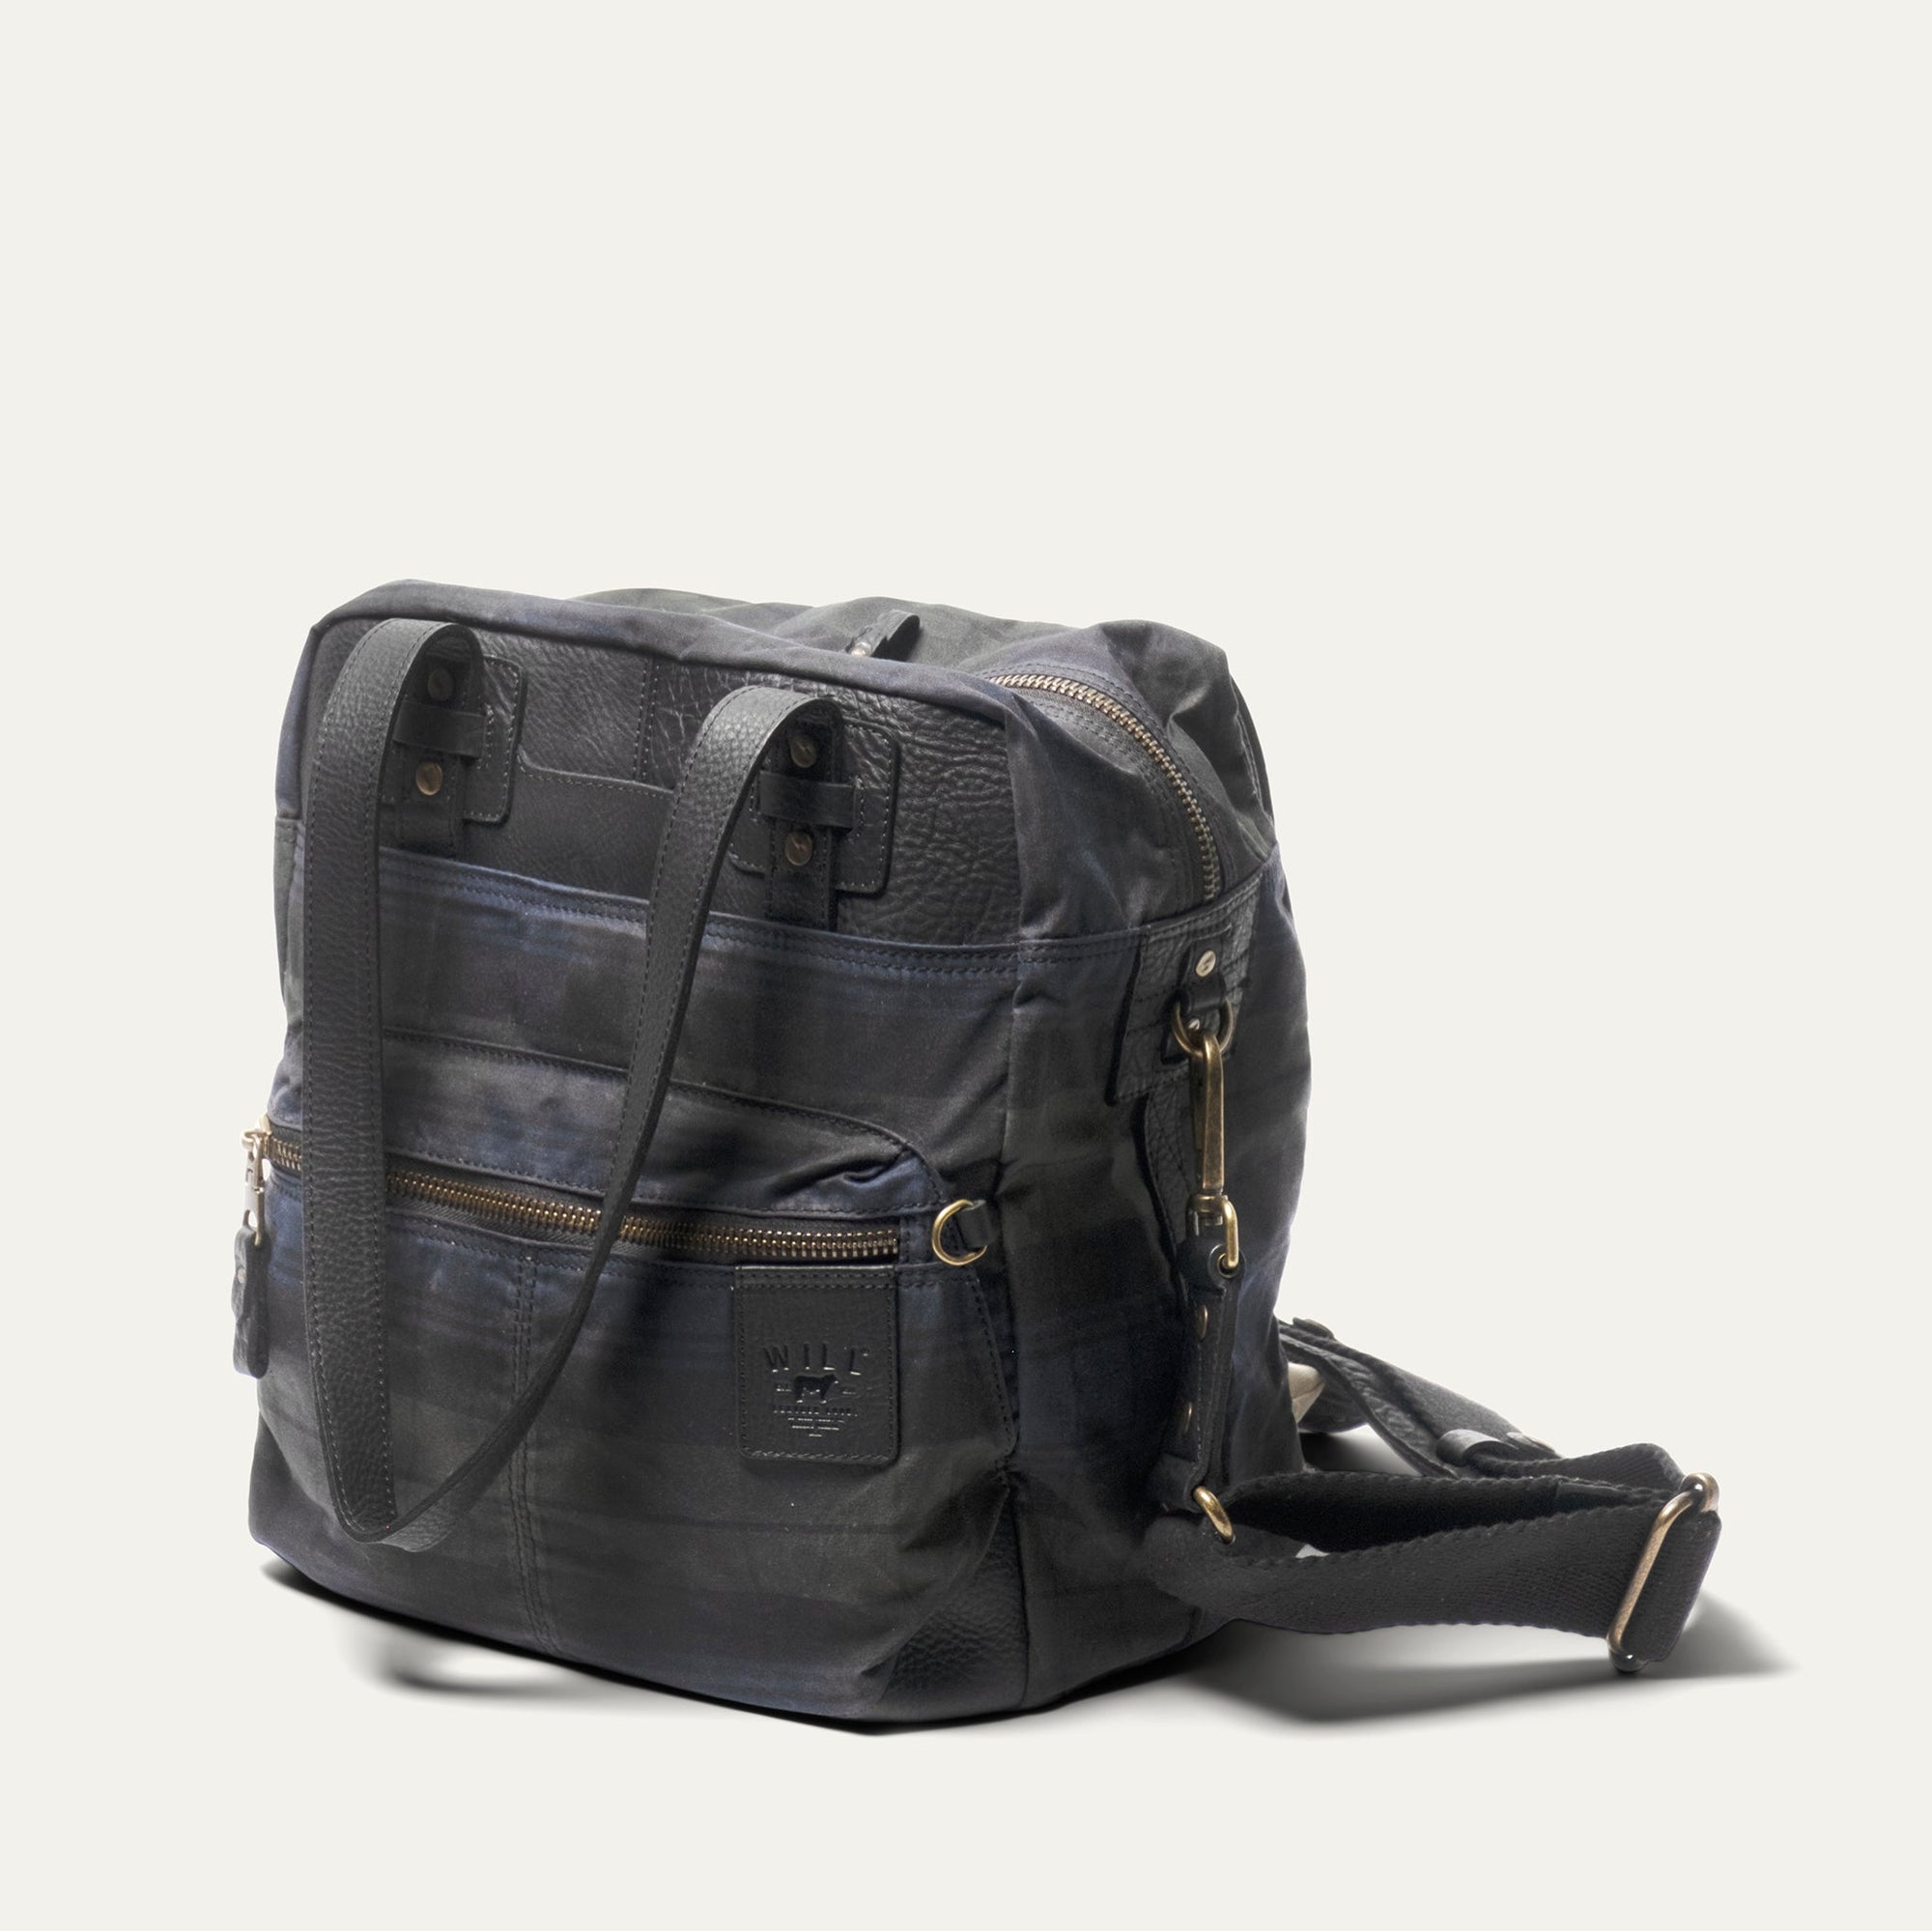 Waxed Canvas and Leather 'Adventure Collection' Onward Tote in Black/Navy Plaid by Will Leather Goods